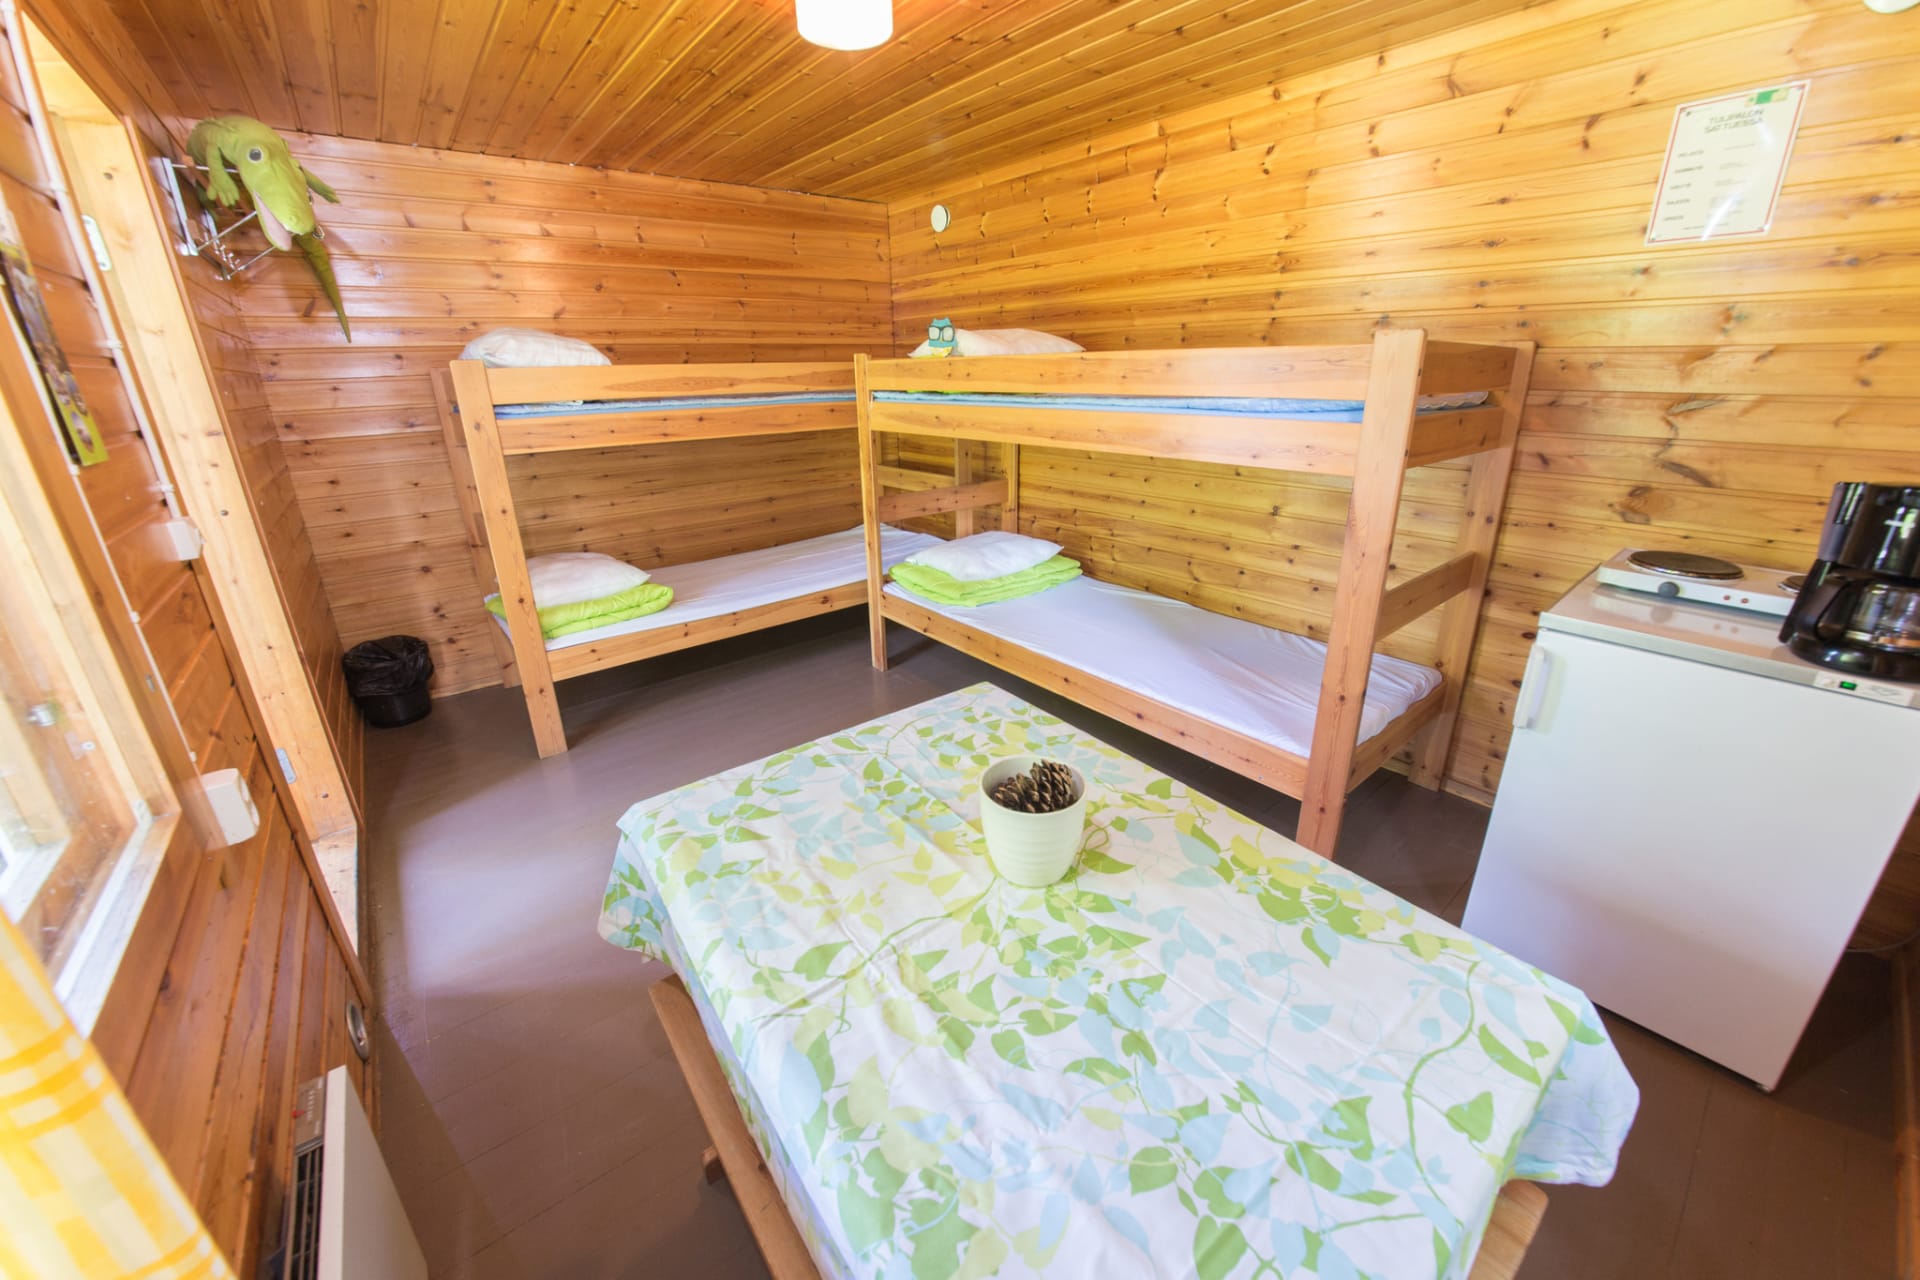 Härmälä Camping has cottages for 4 persons with 2 bunk beds, table, chairs and fridge.